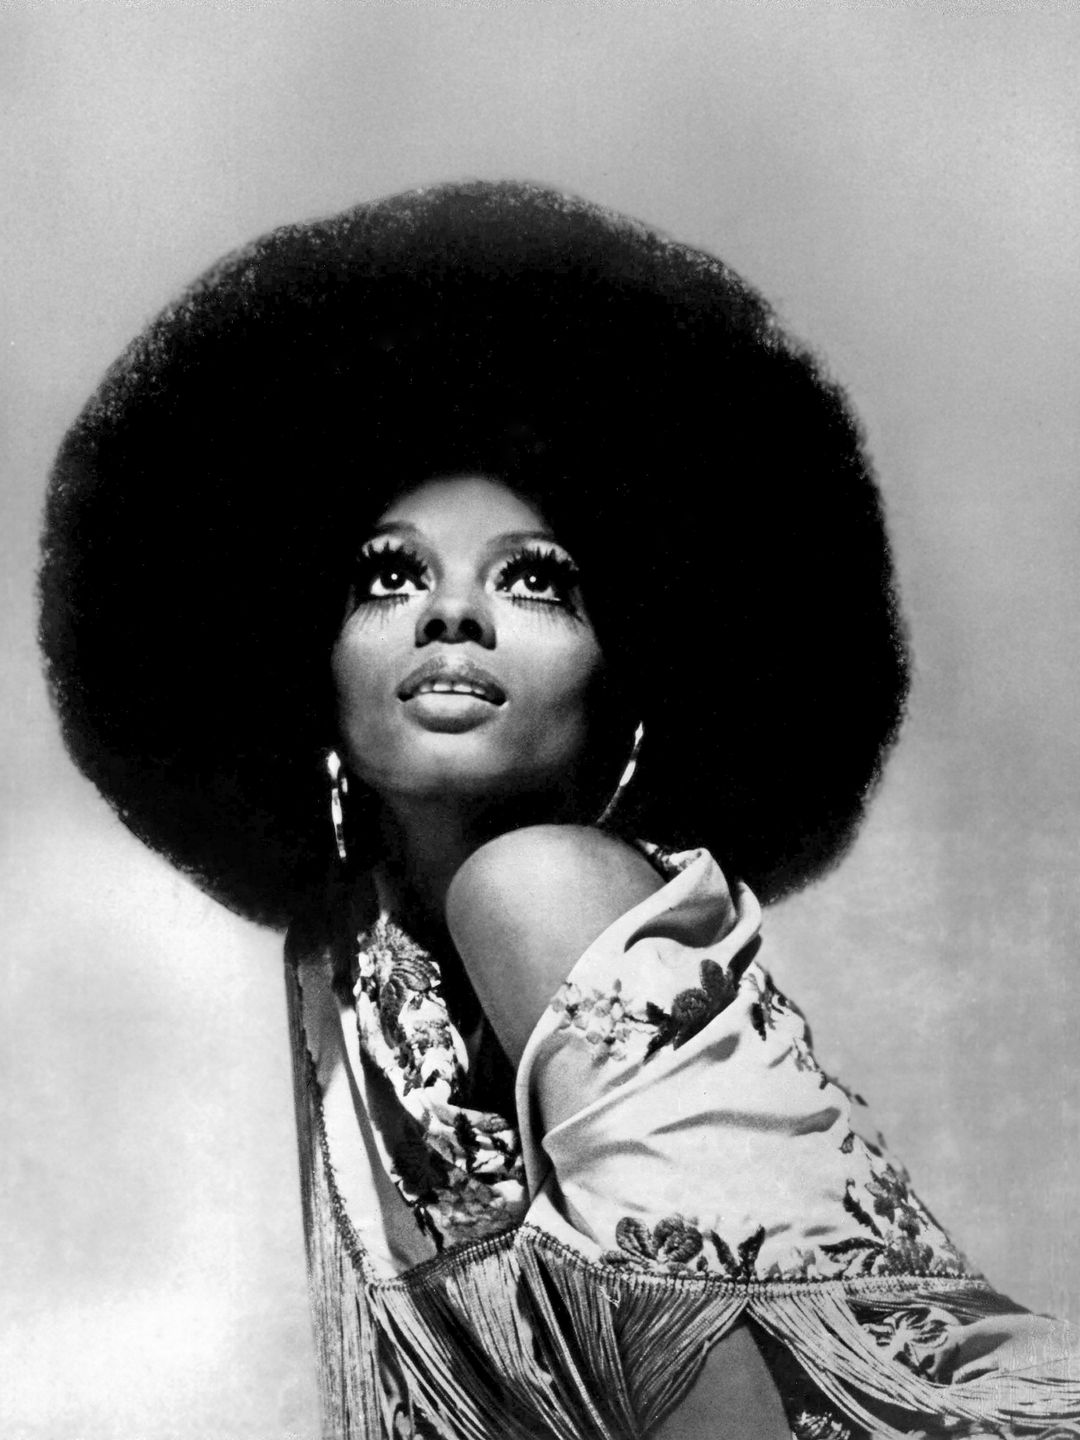 The 15 most iconic 70s hairstyles of all time | HELLO!